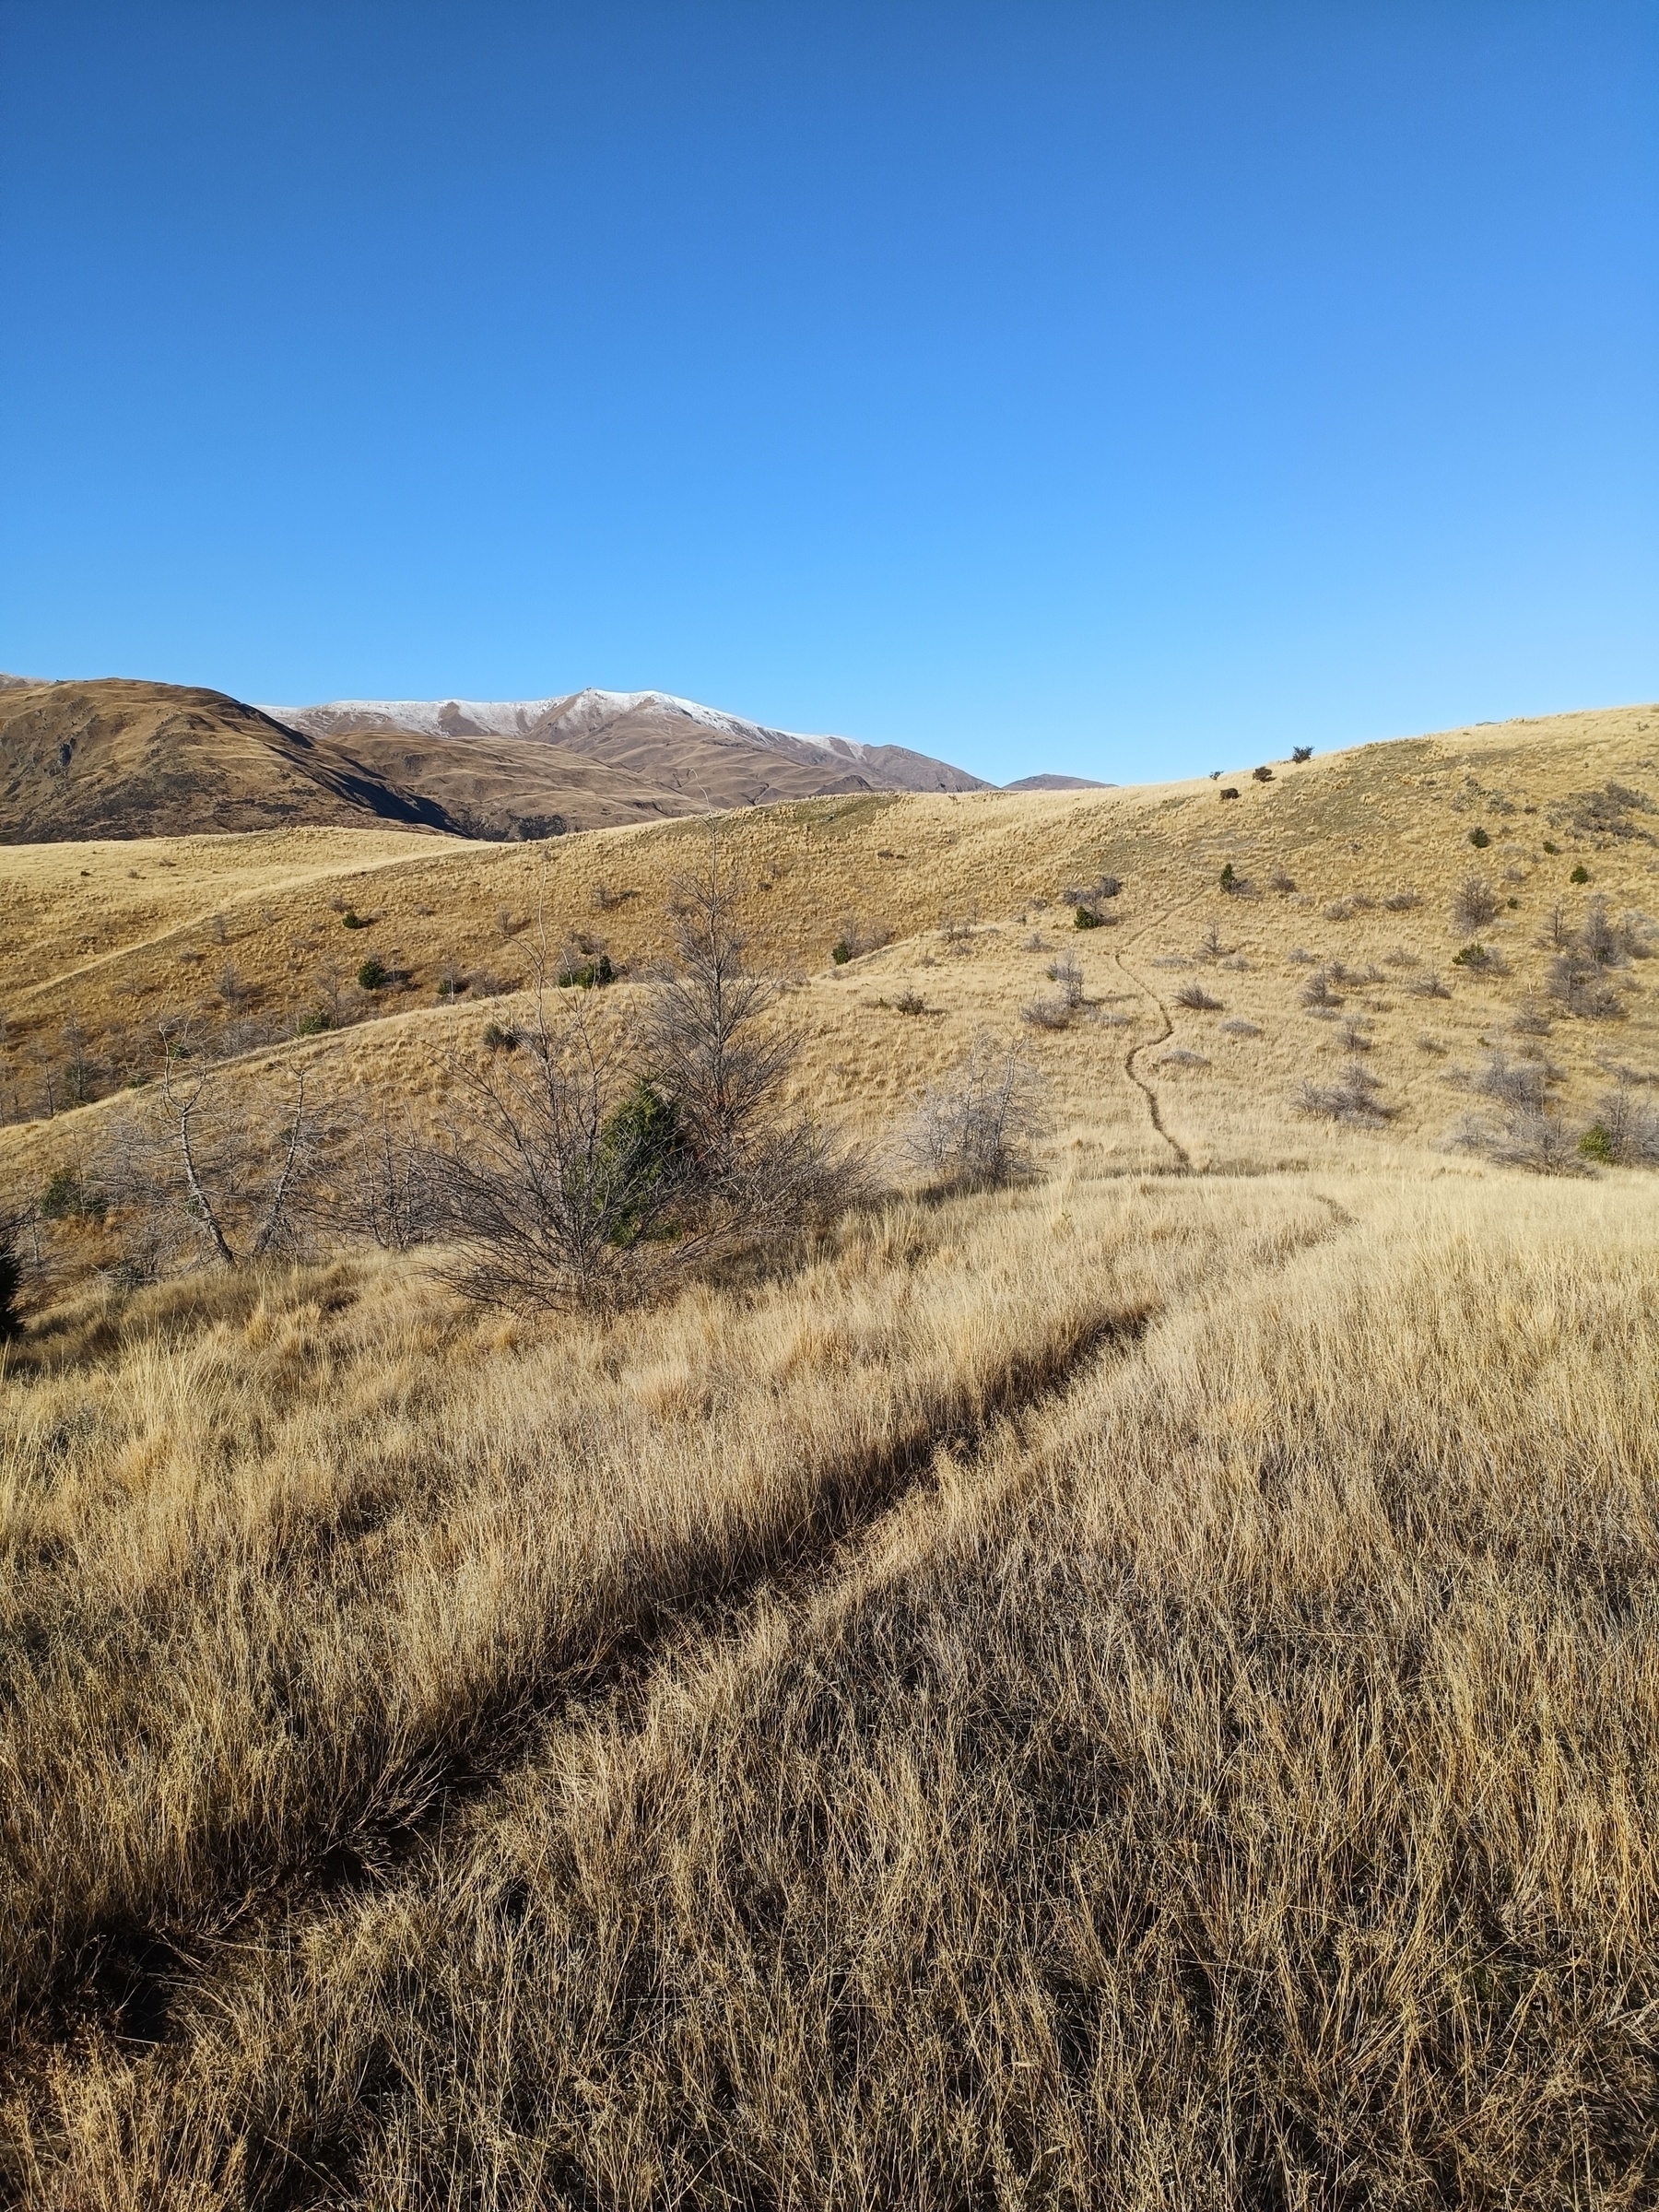 Meandering trail through golden grassy rounded hills on a bluebird day.